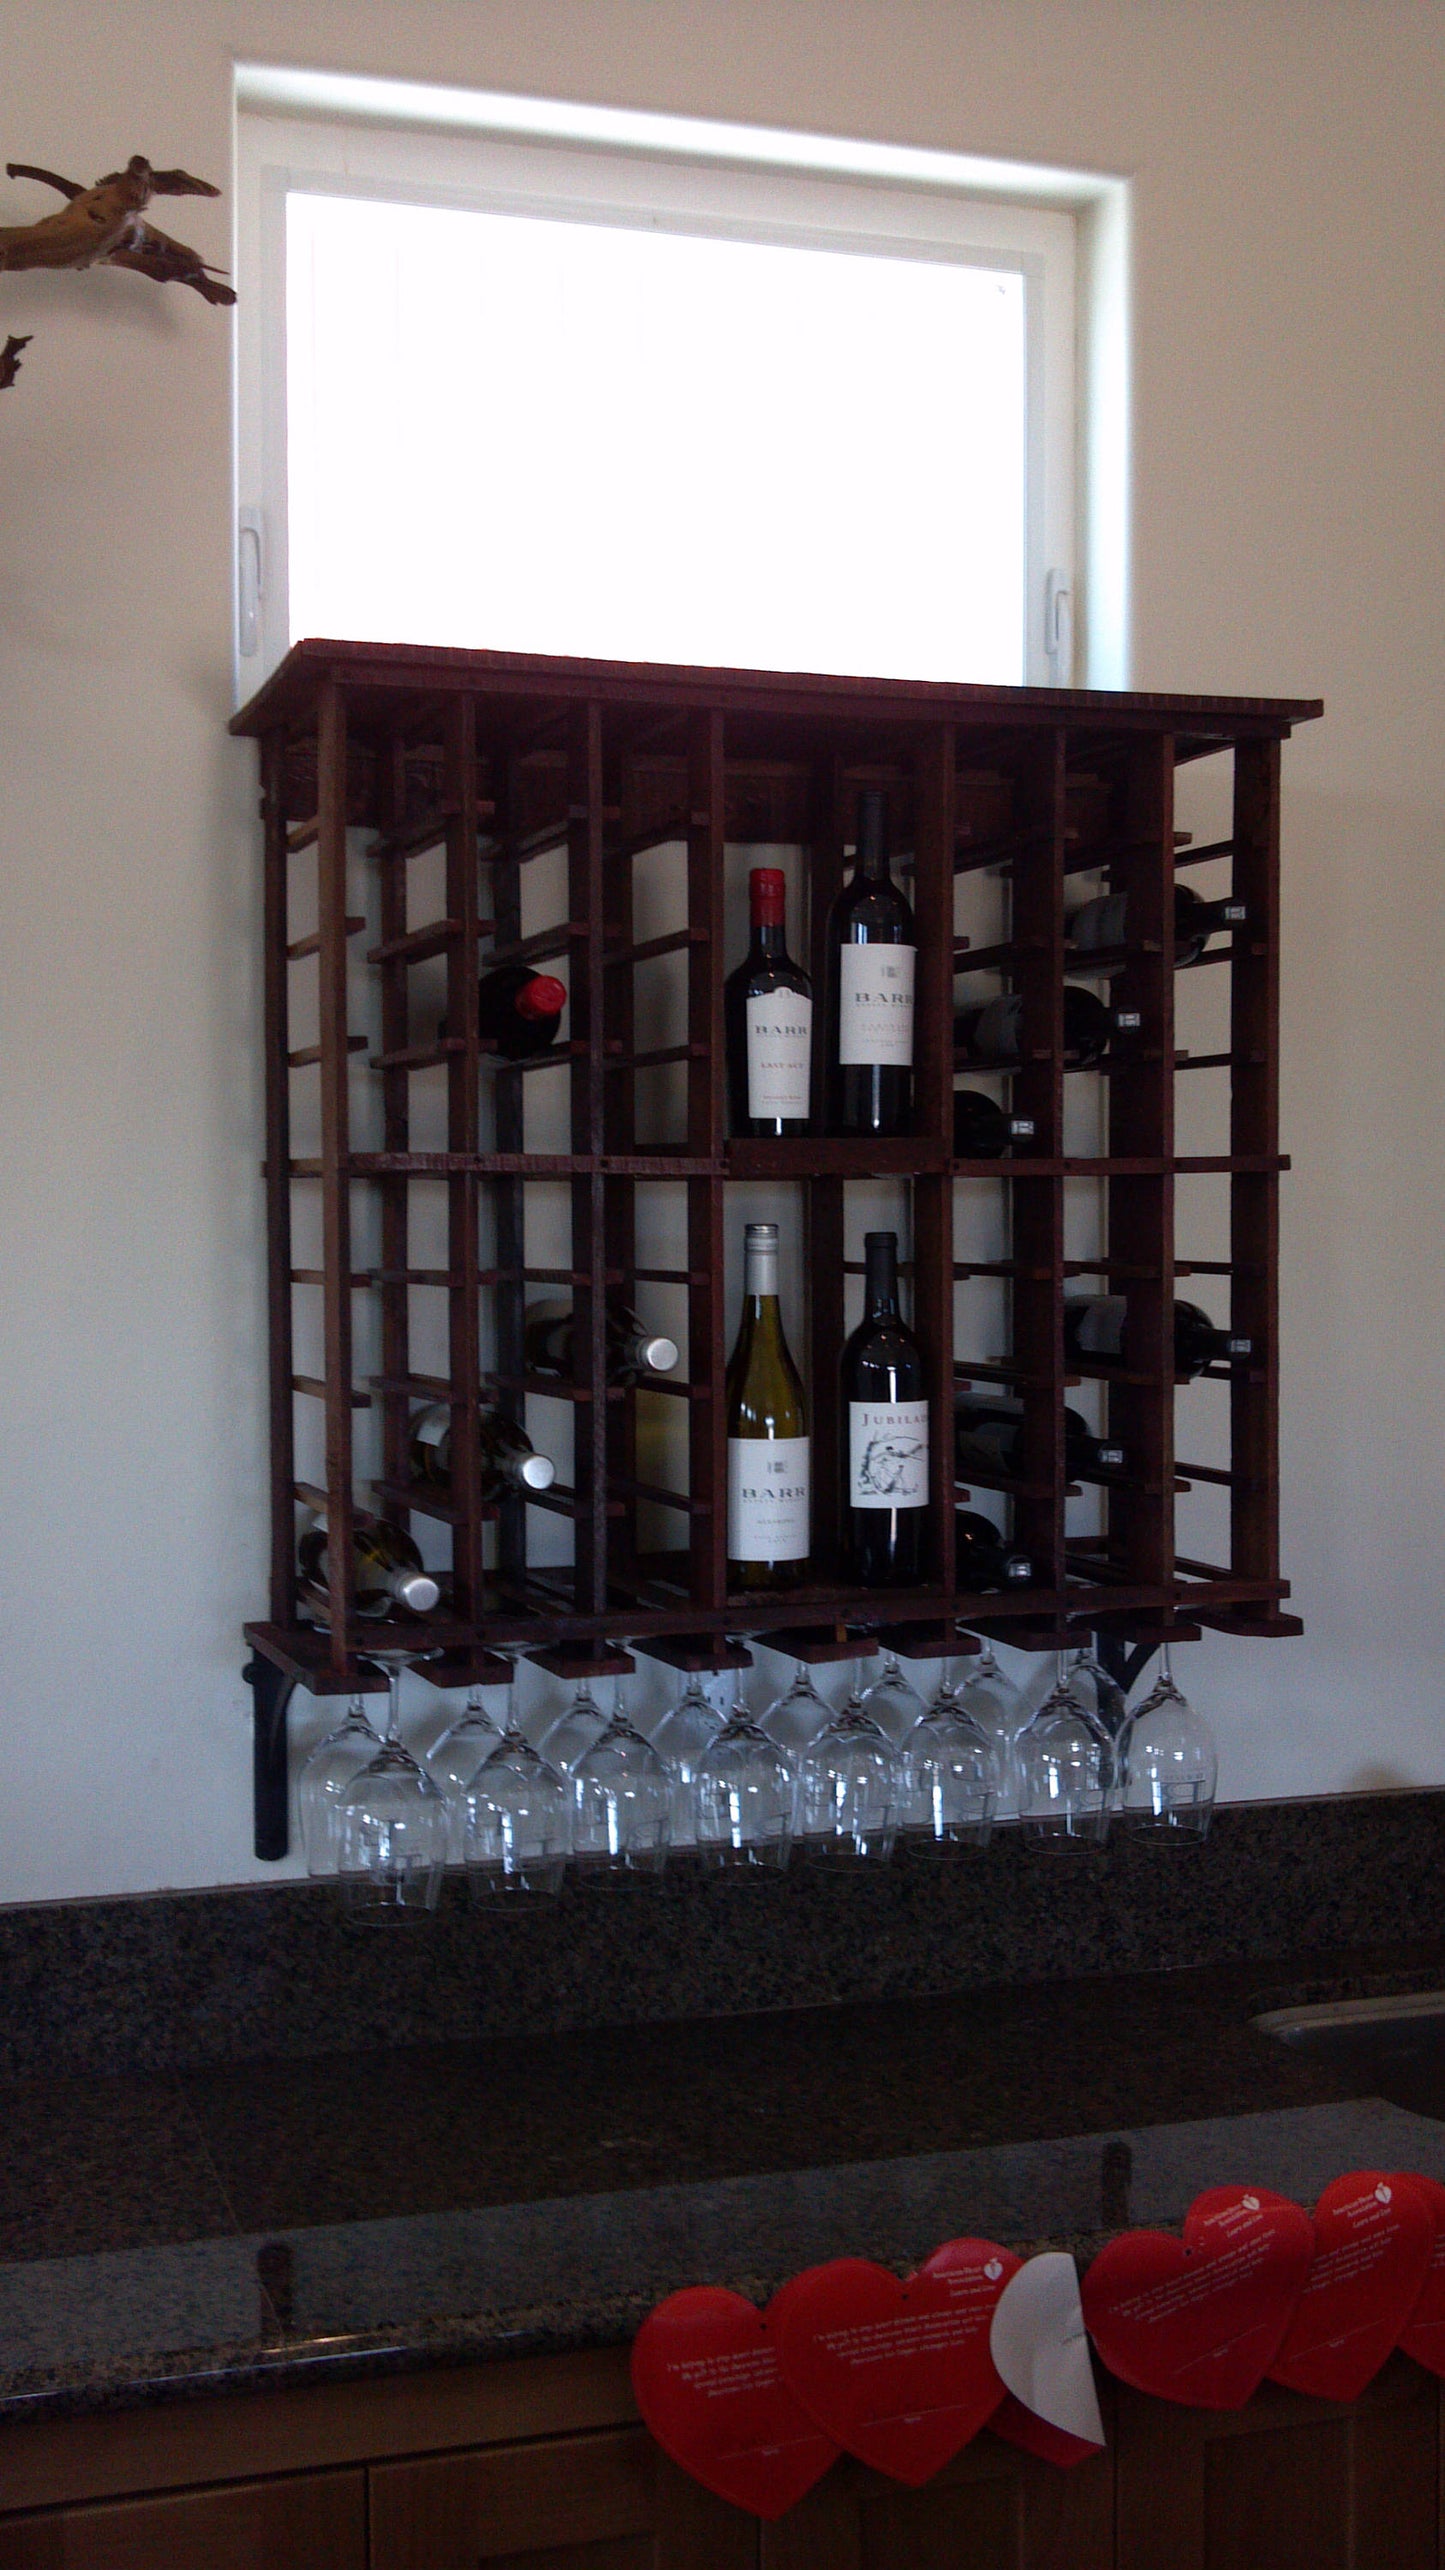 WINE RACK Collection - Touraine - Hanging Wine Rack made from reclaimed Wine Tank staves - 100% Recycled! 